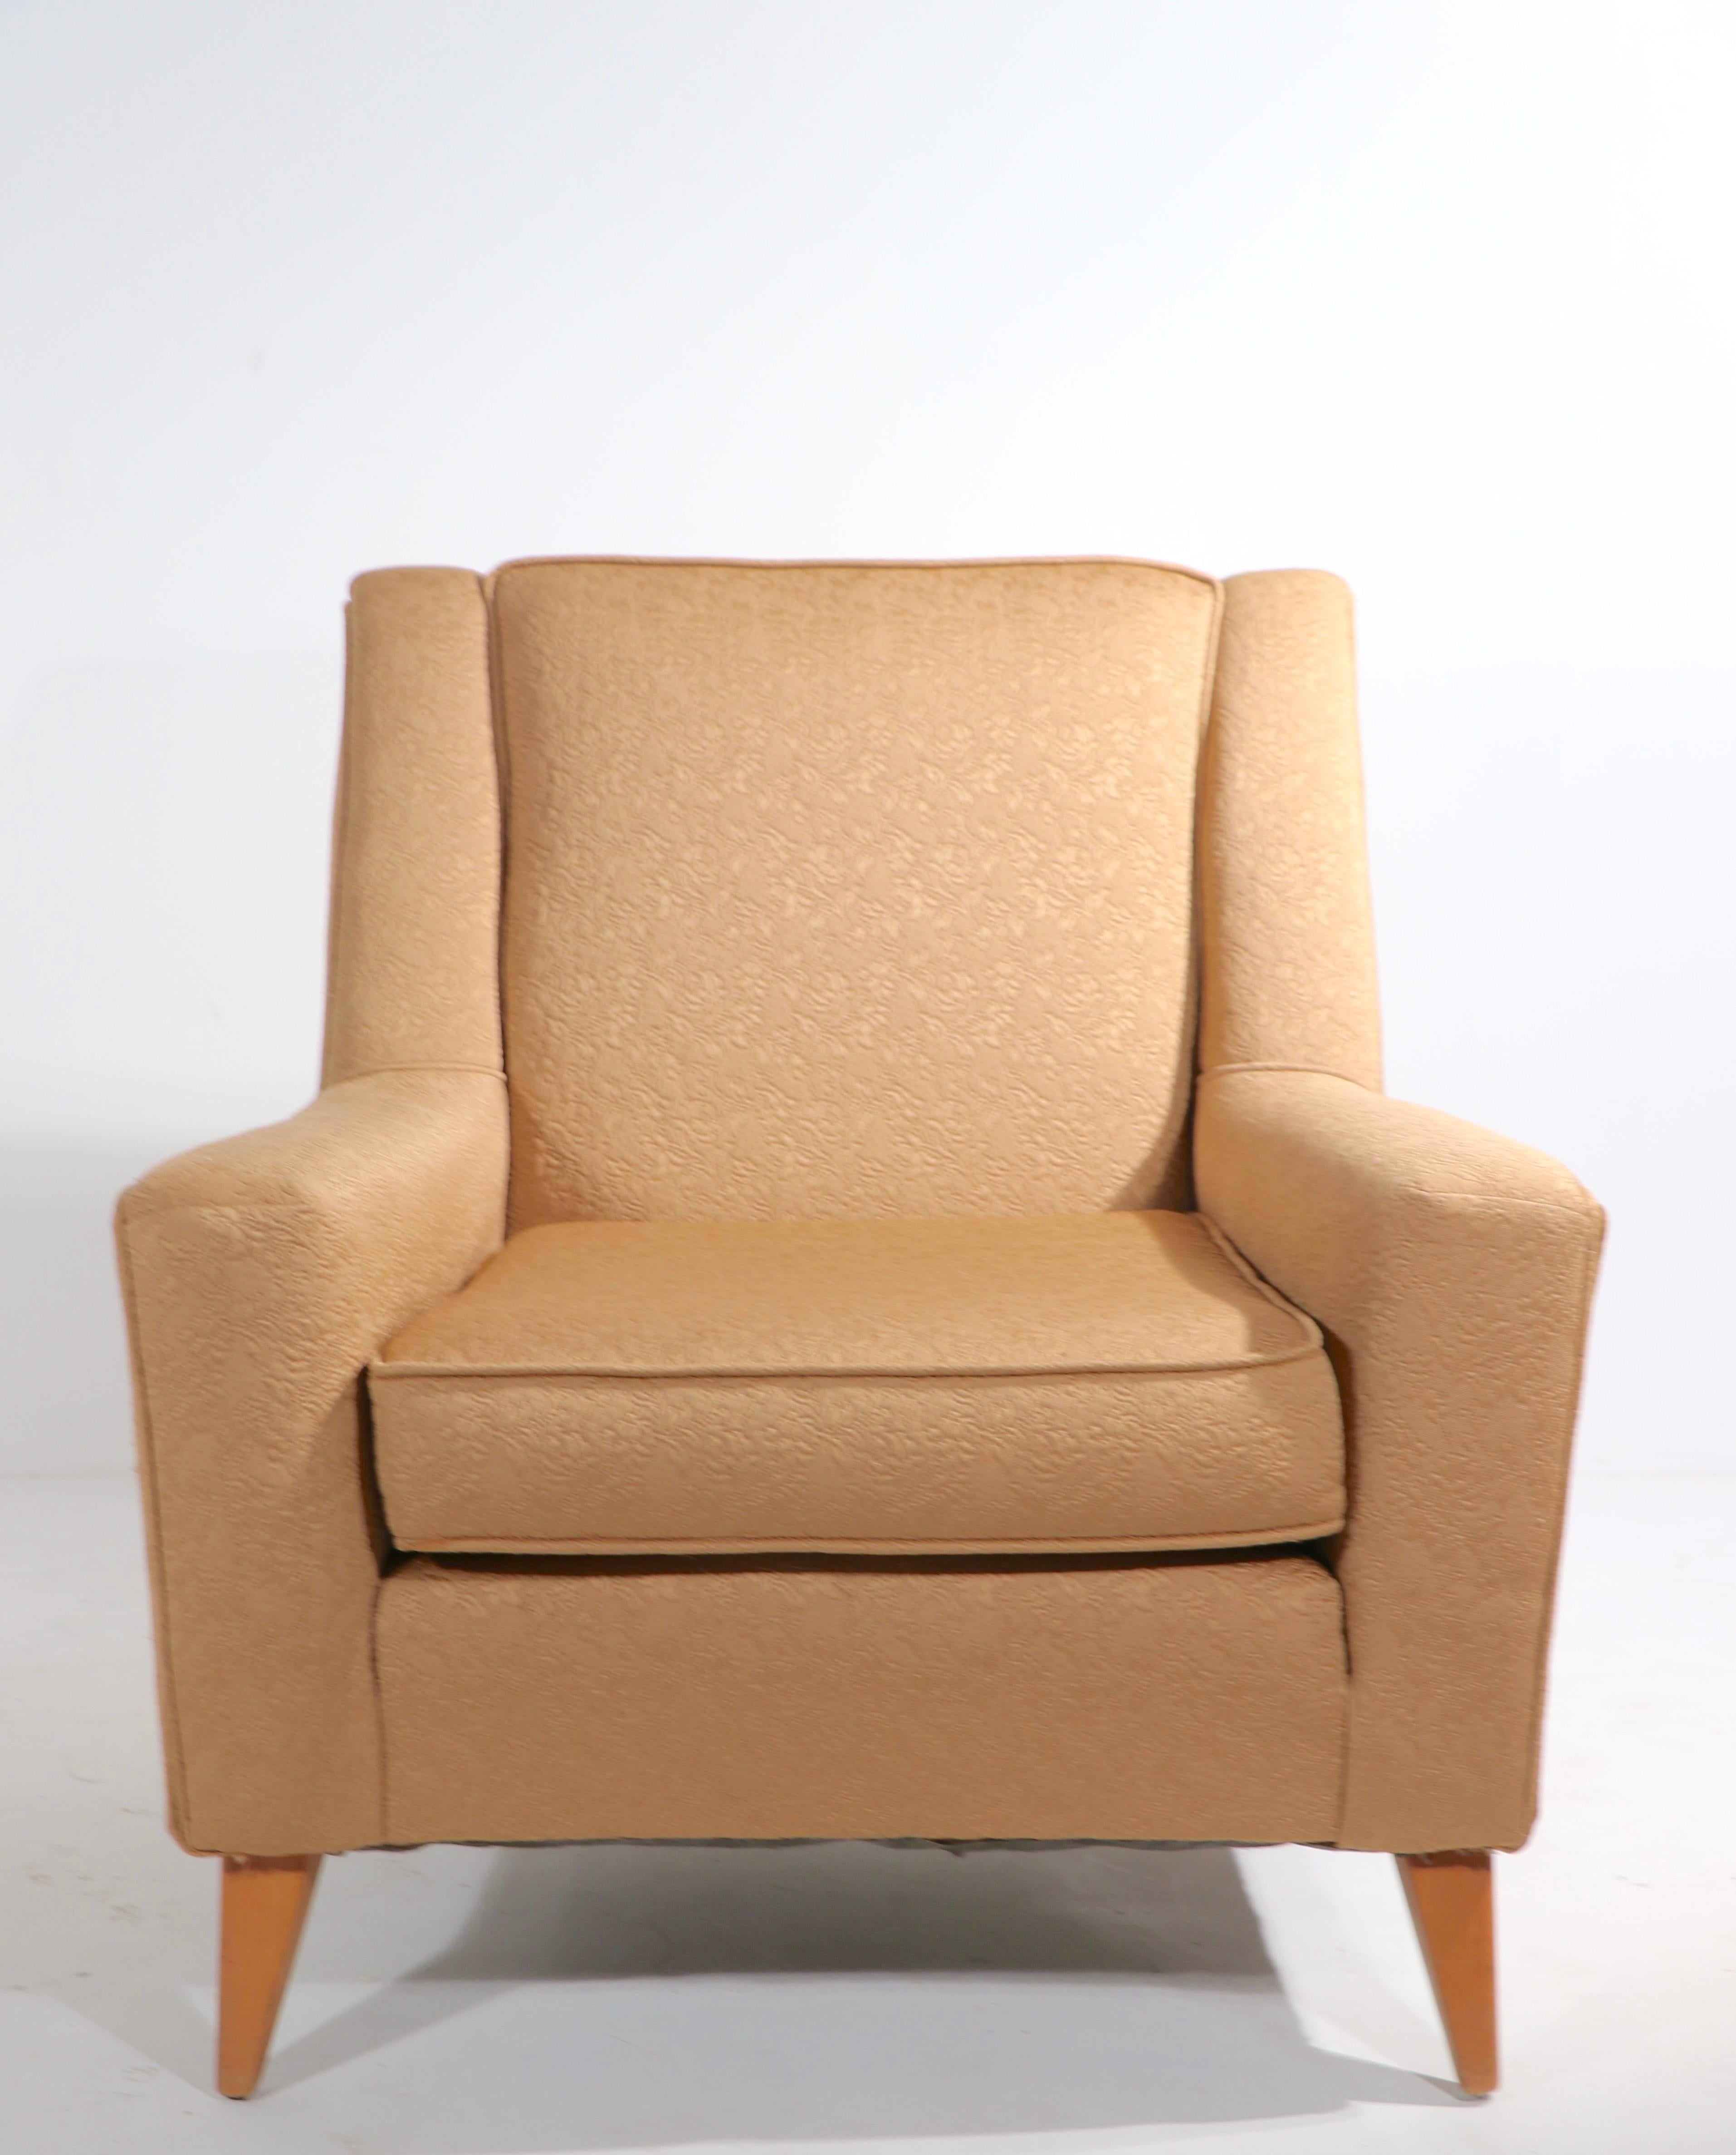 Extra clean mid century lounge chair attributed to Heywood Wakefield. This example is well constructed, well designed and in. exceptional, ready to use condition. 
 Measures: Total H 32 x arm H 22 x seat H 18
W 32 x D 27 inches.